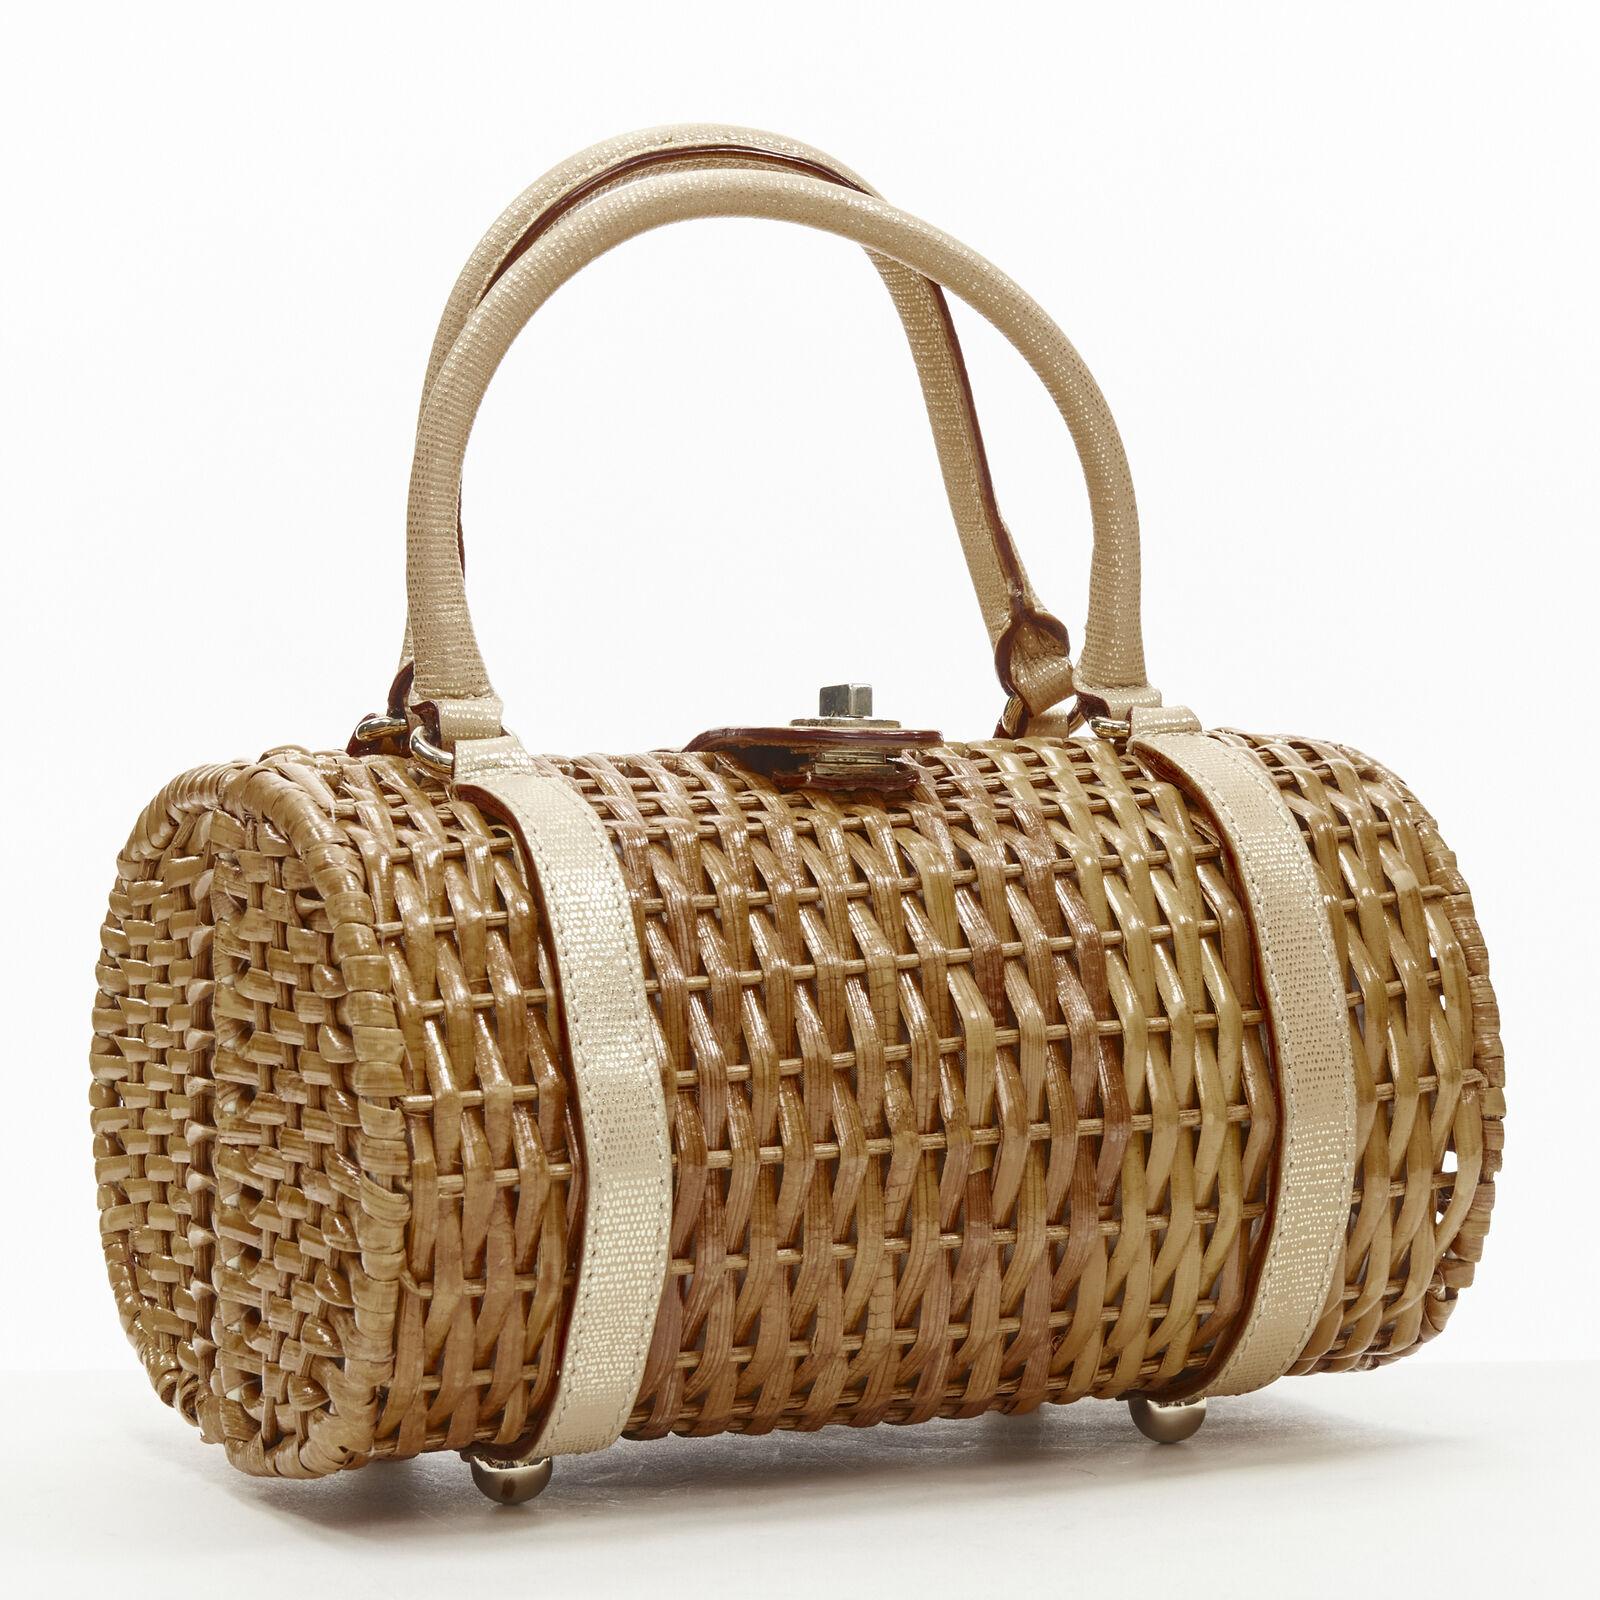 KATE SPADE brown bamboo rattan wicker metallic leather handle log bag
Reference: ANWU/A00935
Brand: Kate Spade
Material: Bamboo
Color: Brown, Gold
Closure: Lock
Lining: Cotton
Extra Details: Floral cotton lining. Zip pocket at